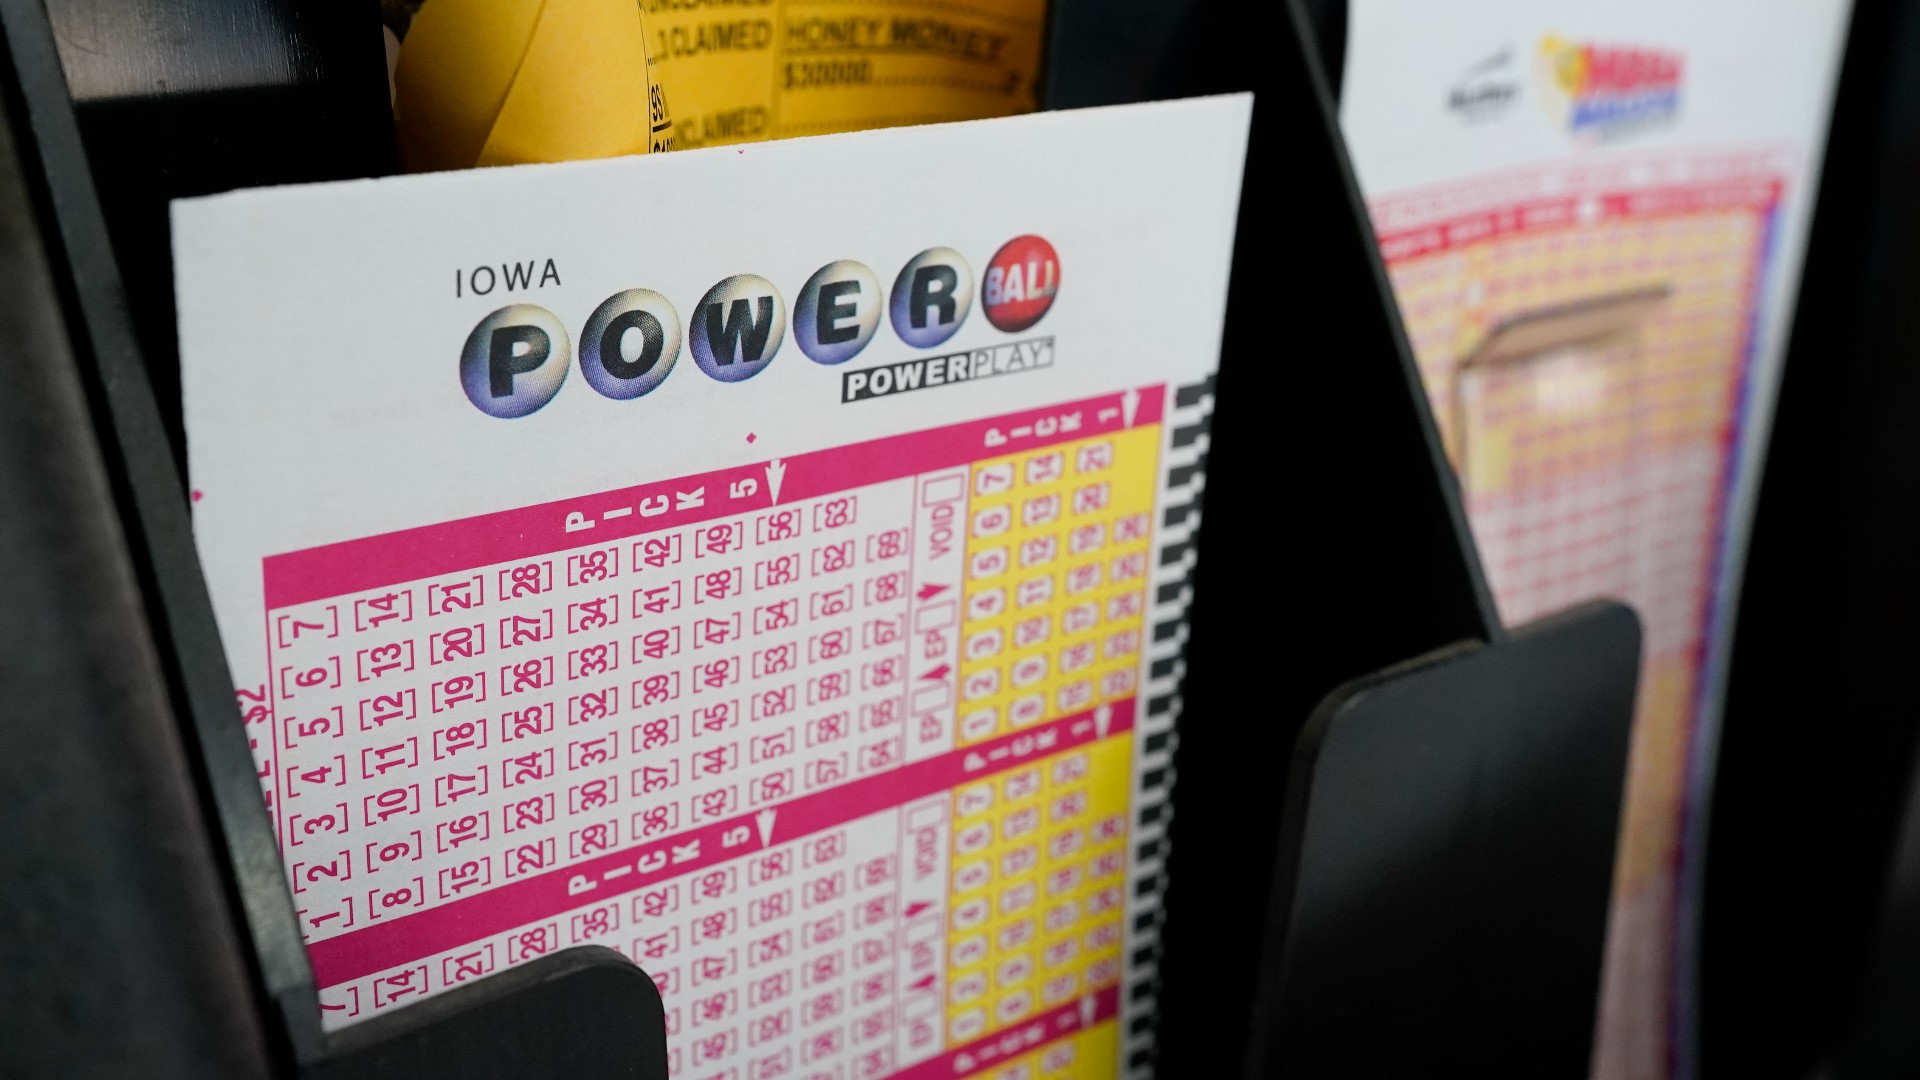 While the jackpot increases, the chance of winning all that money remains the same. There have now been 39 Powerball drawings in a row without a grand prize winner.